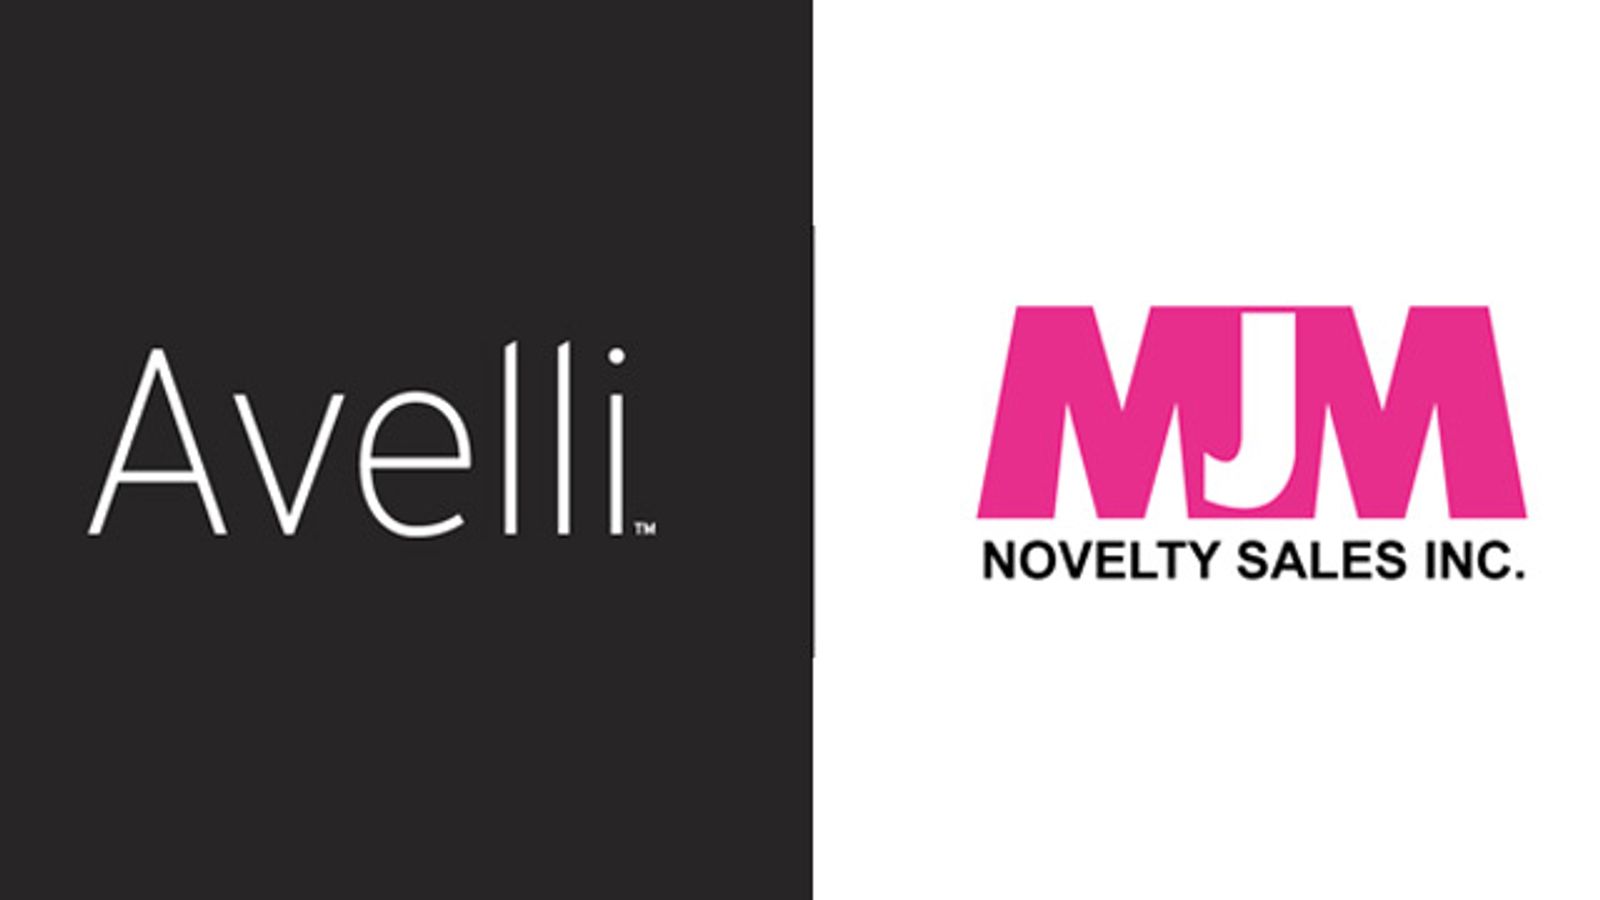 Avelli Inks Distro Deal with MJM Novelty Sales